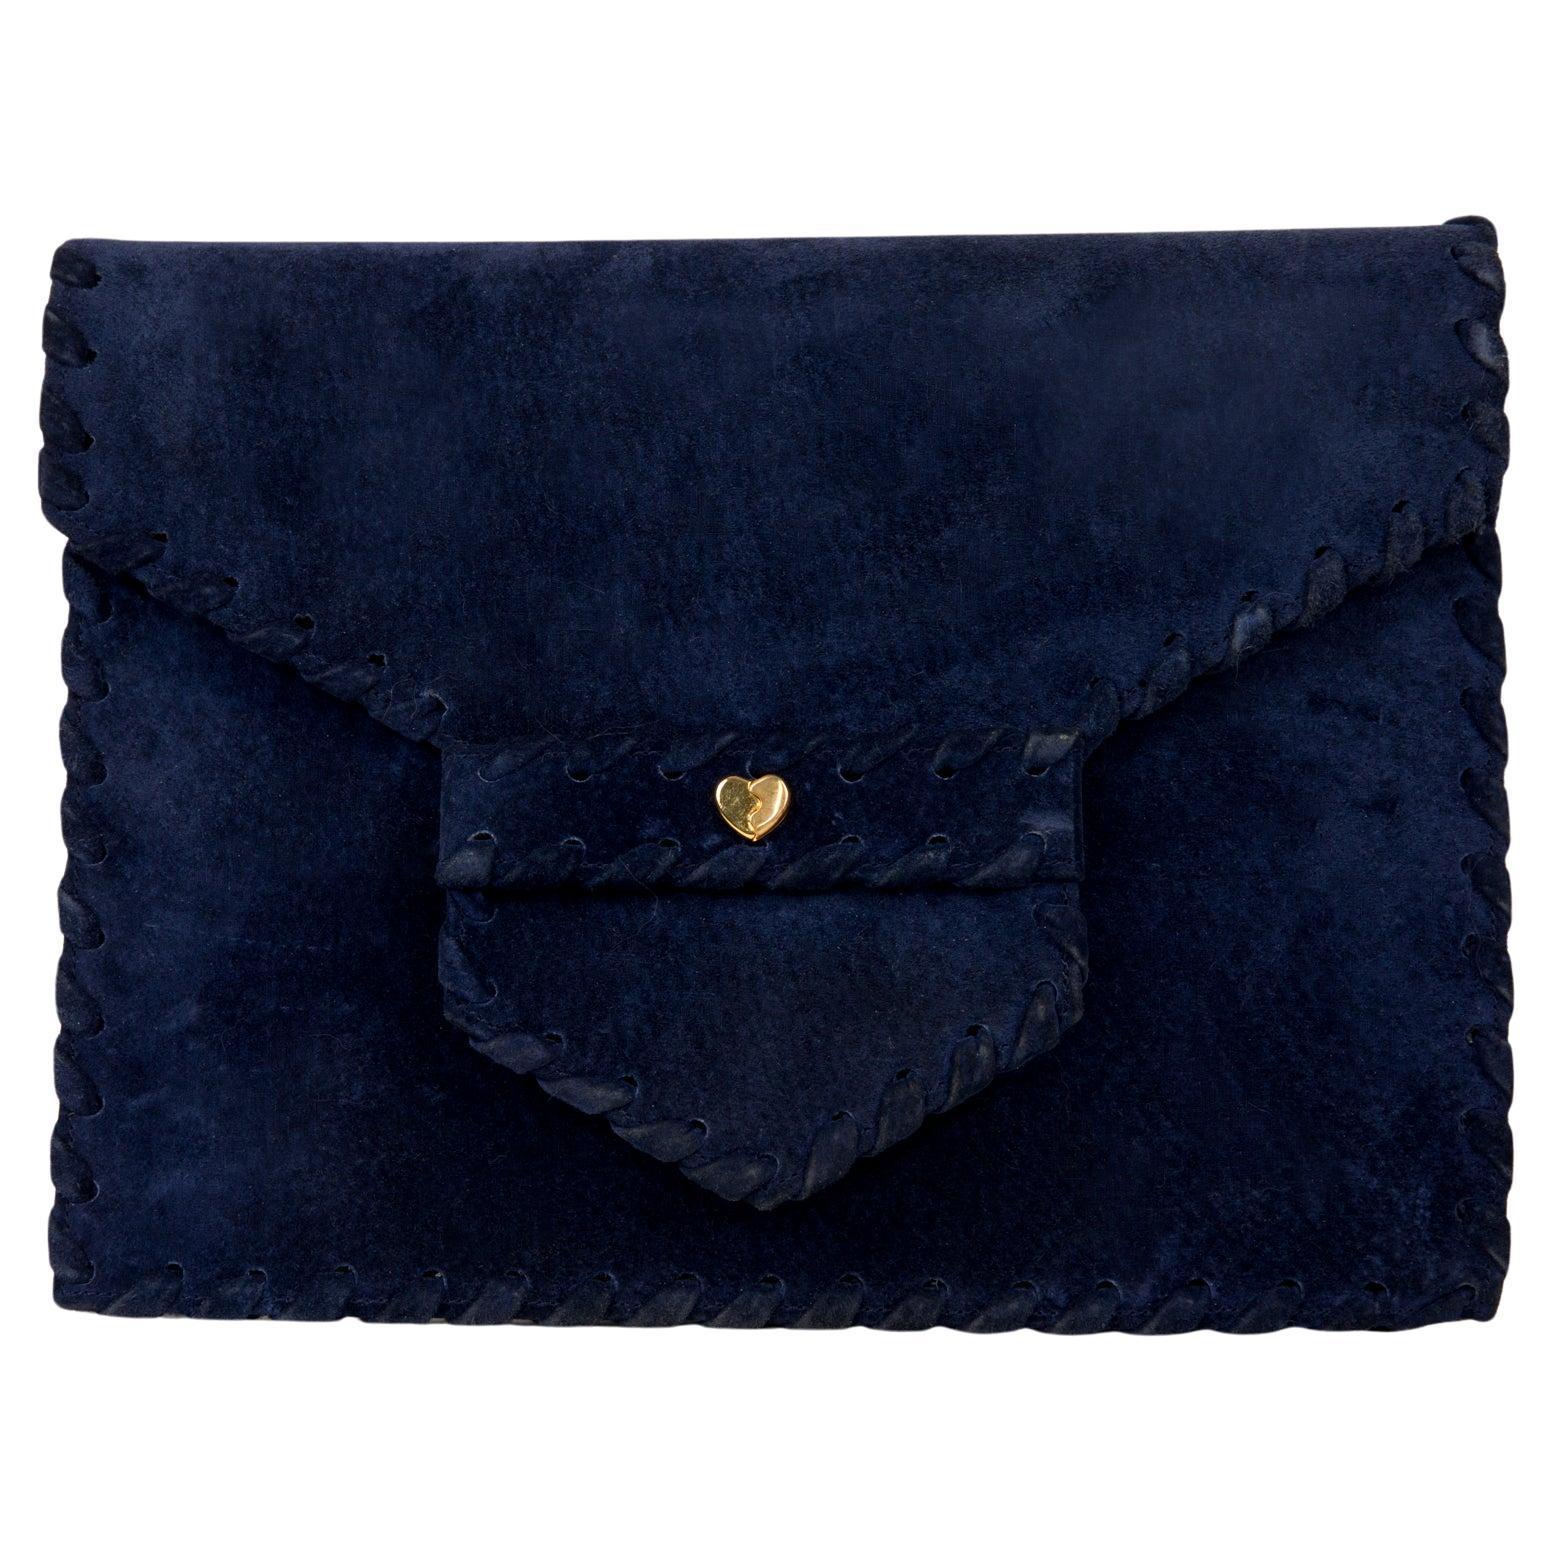 Sepcoeur Blue Suede Leather Large Clutch Bag  For Sale